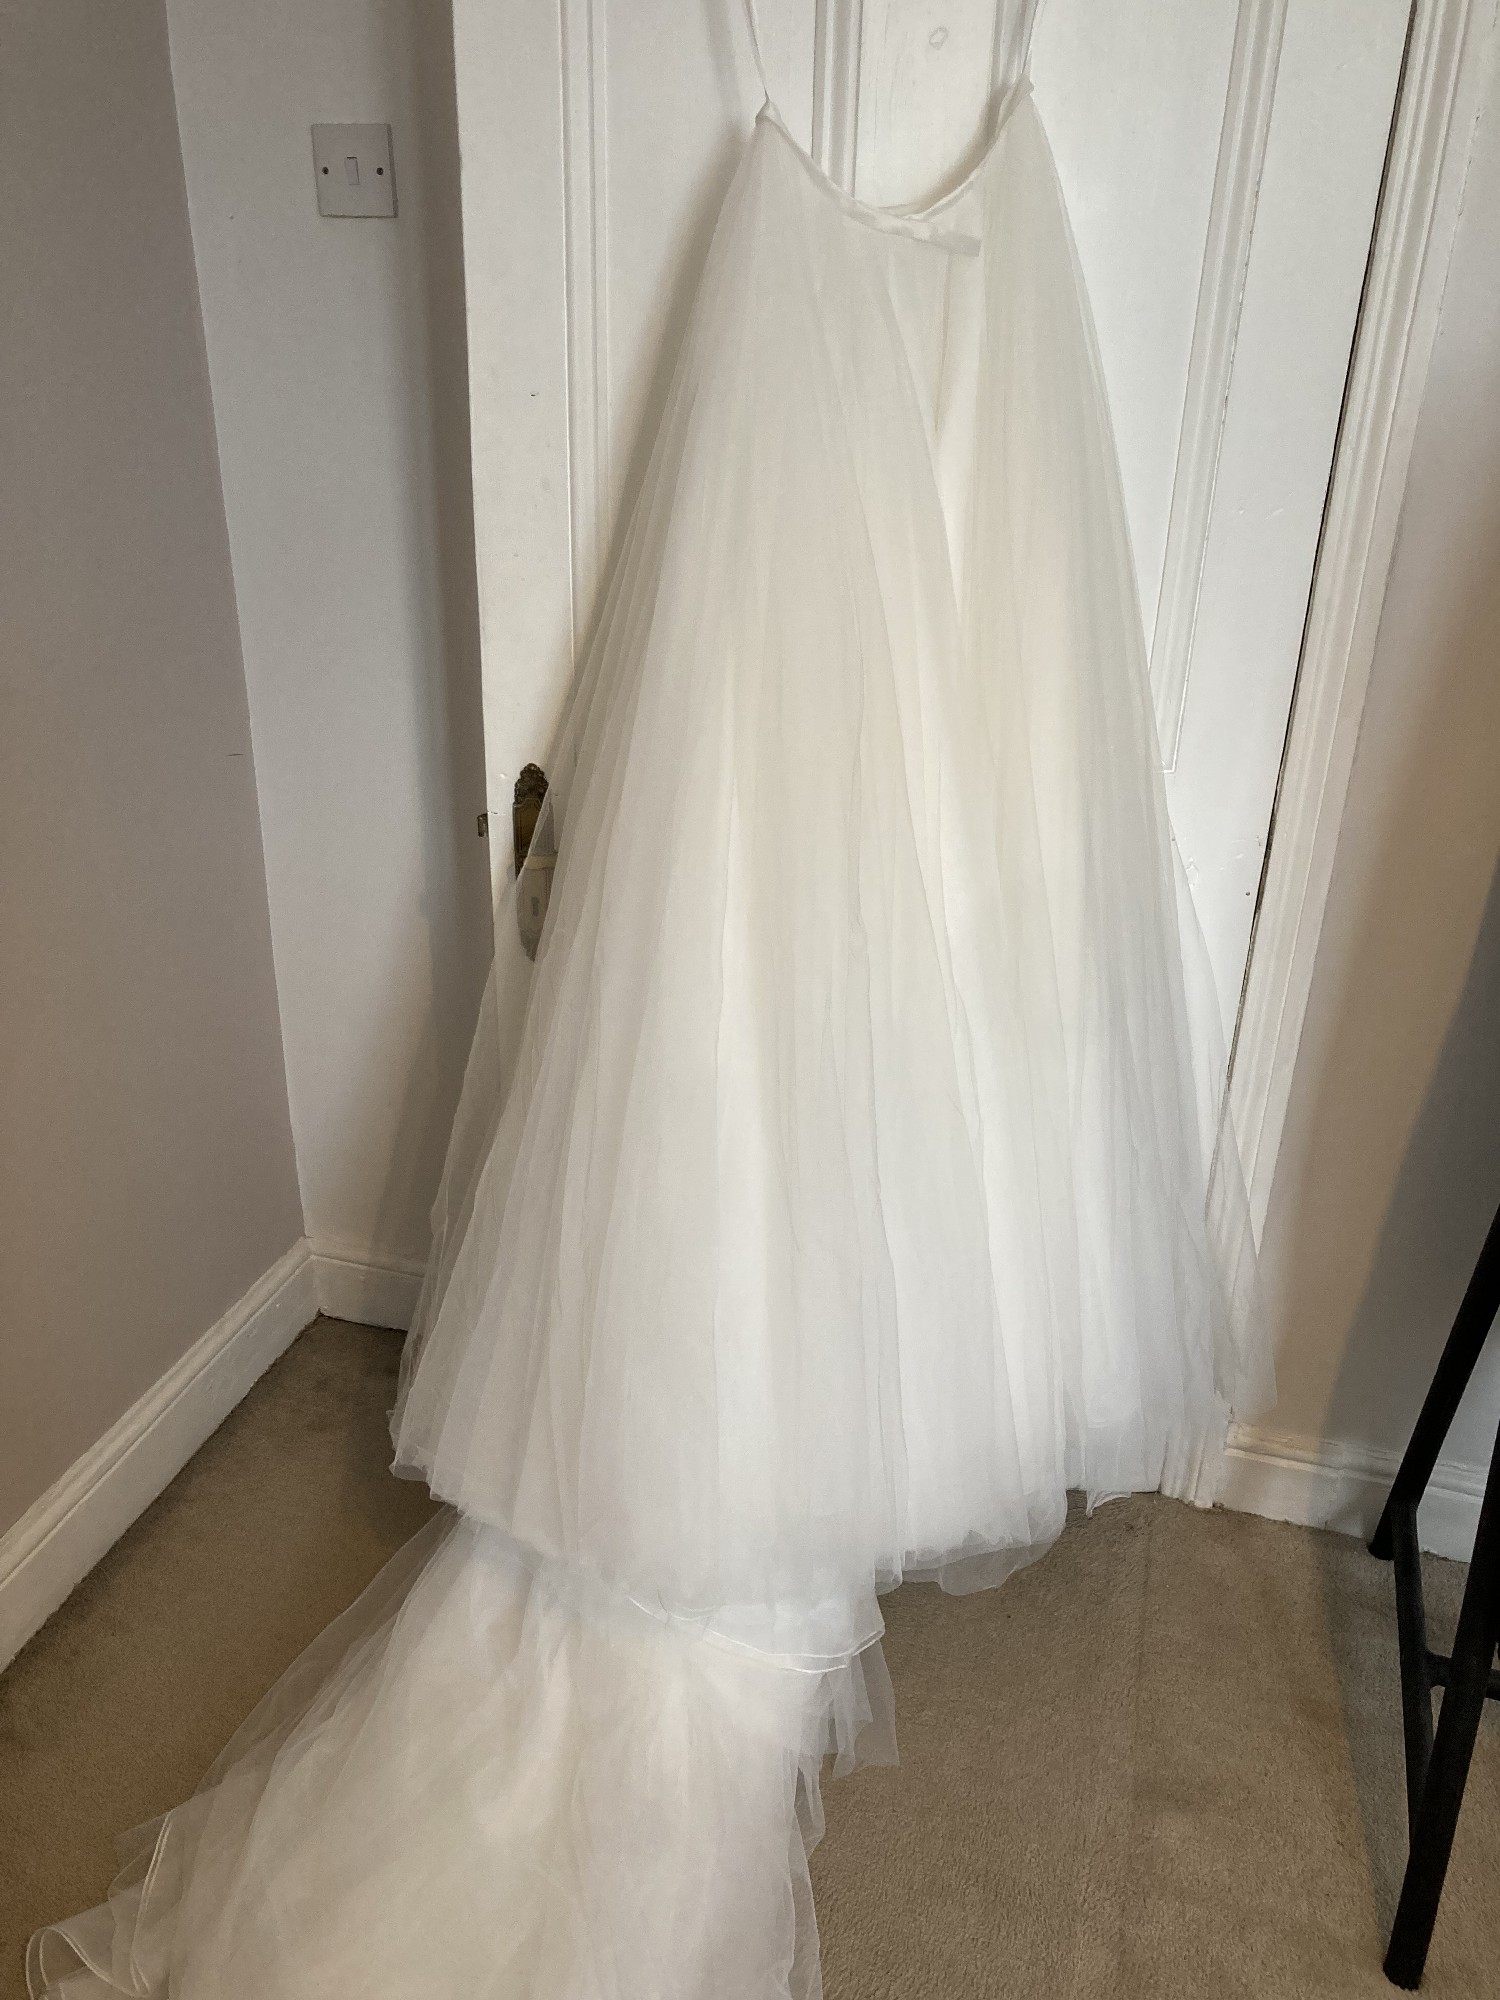 Removable Flowy Skirt with Gap : Made With Love, Unique Bridal